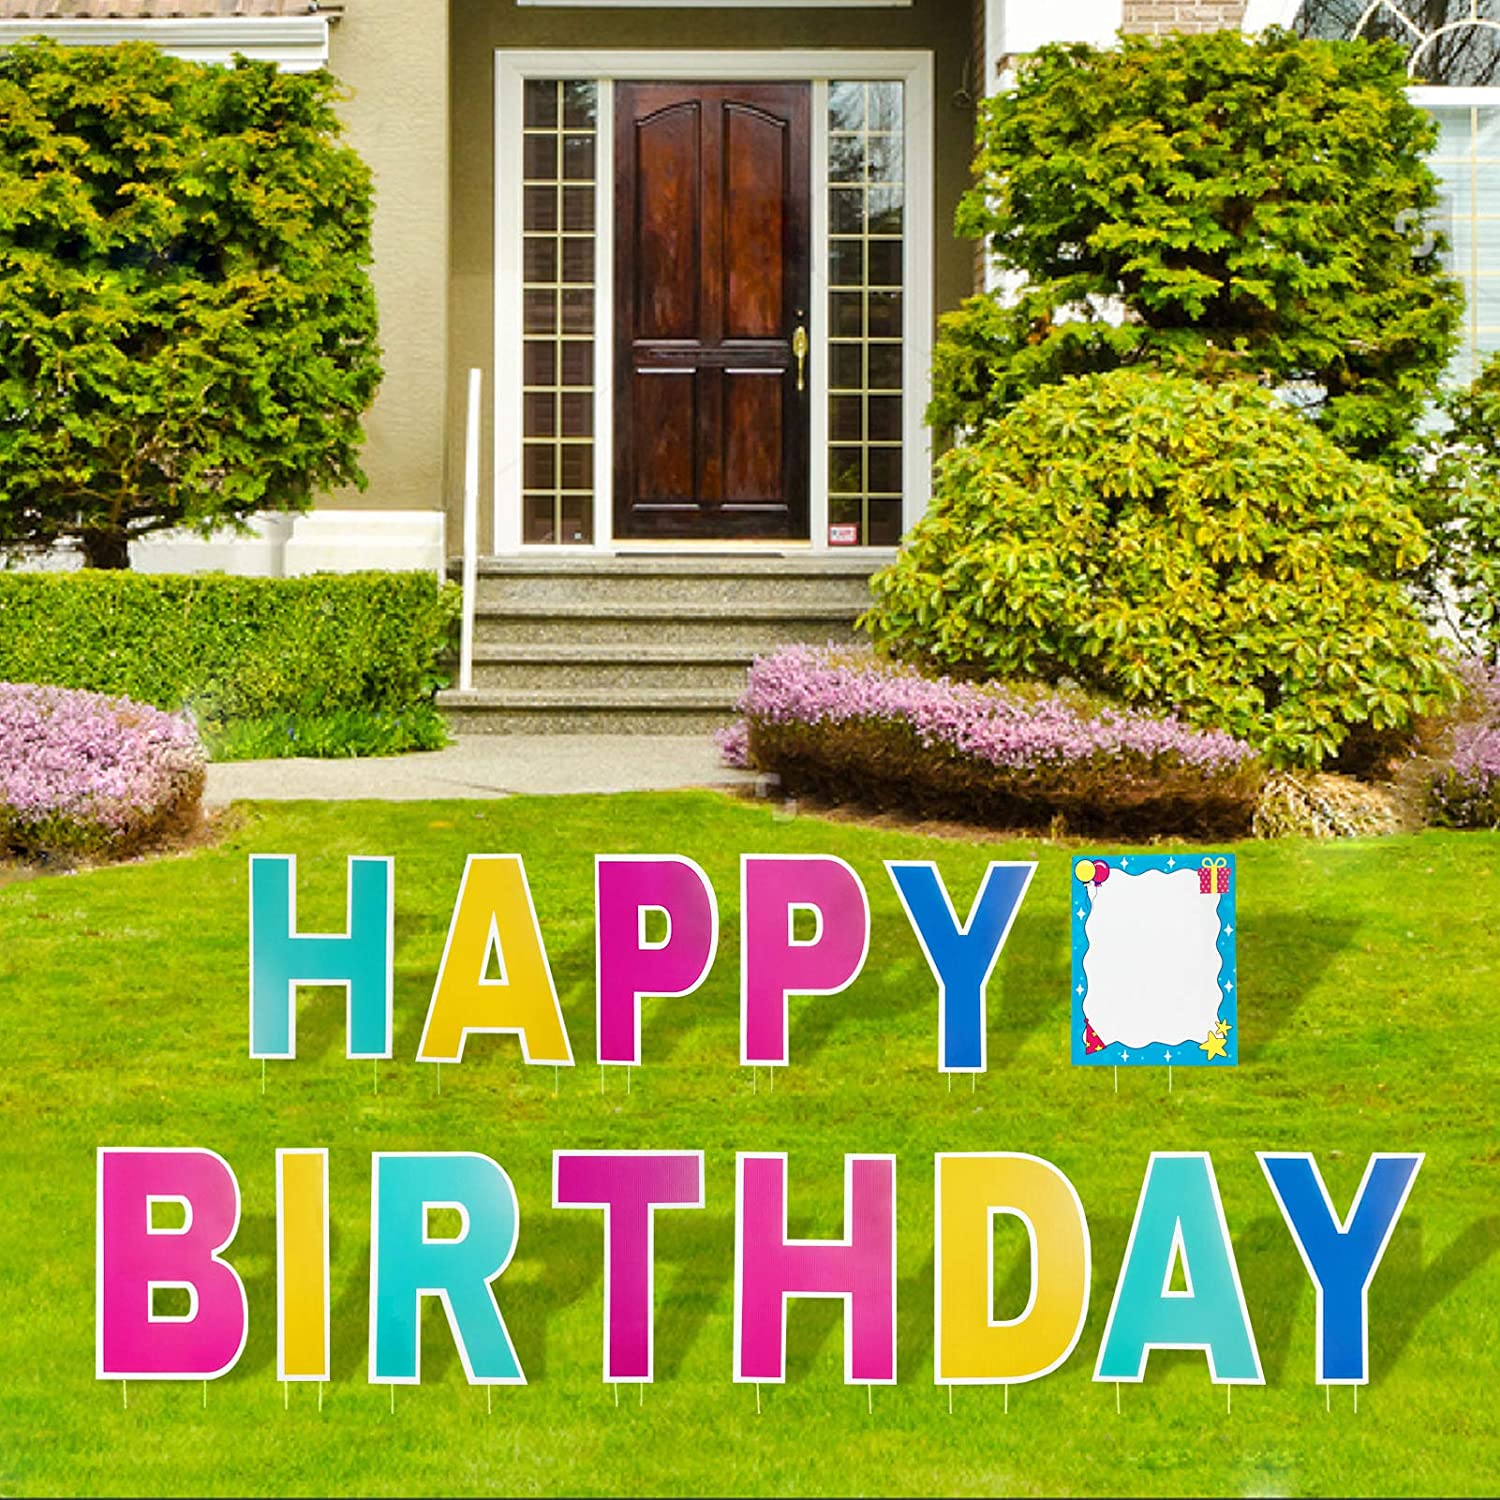 Factory For Happy 40th Birthday Lawn Signs - Happy Birthday Yard Sign 16 Inch Birthday Letters Lawn Sign Colorful Birthday Yard Decoration with Stakes Cake Balloon Waterproof Garden Lawn Decor for...